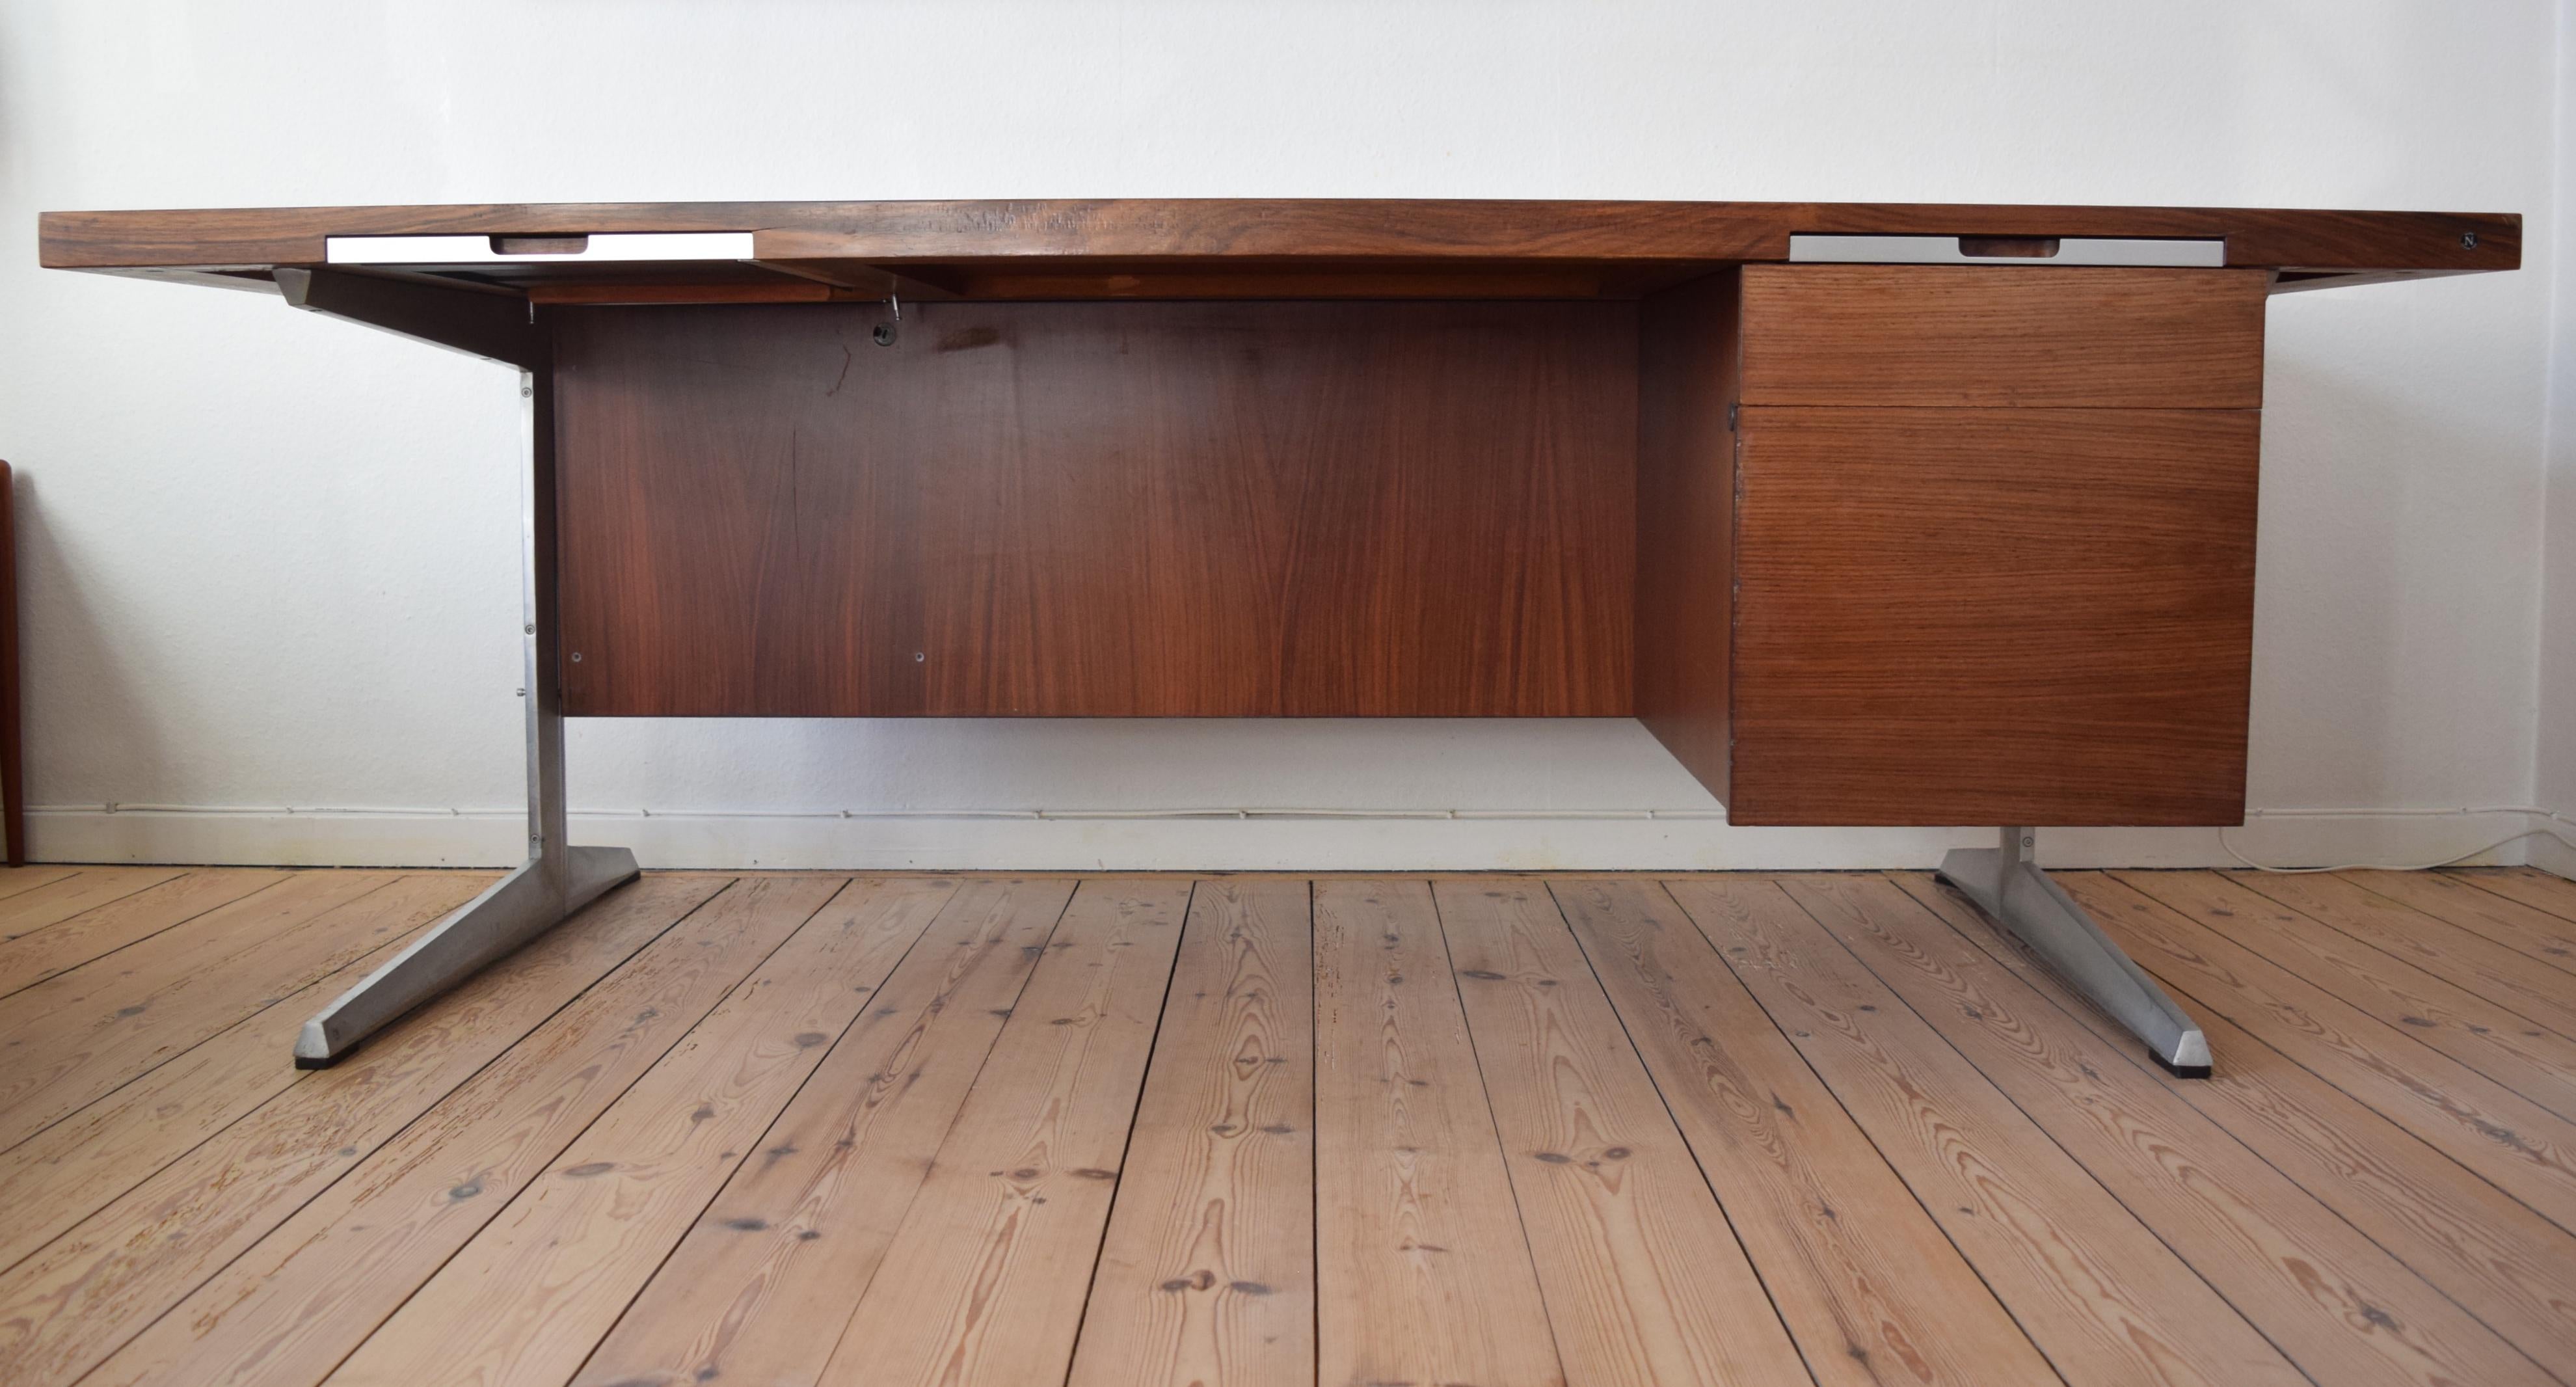 Large Danish rosewood executive desk designer by Marius Byrialsen for Nipu Møbelfabrik. The desk uses a modular system so various elements can be added or removed as required. With all the elements in place there would be two drawer sections on the